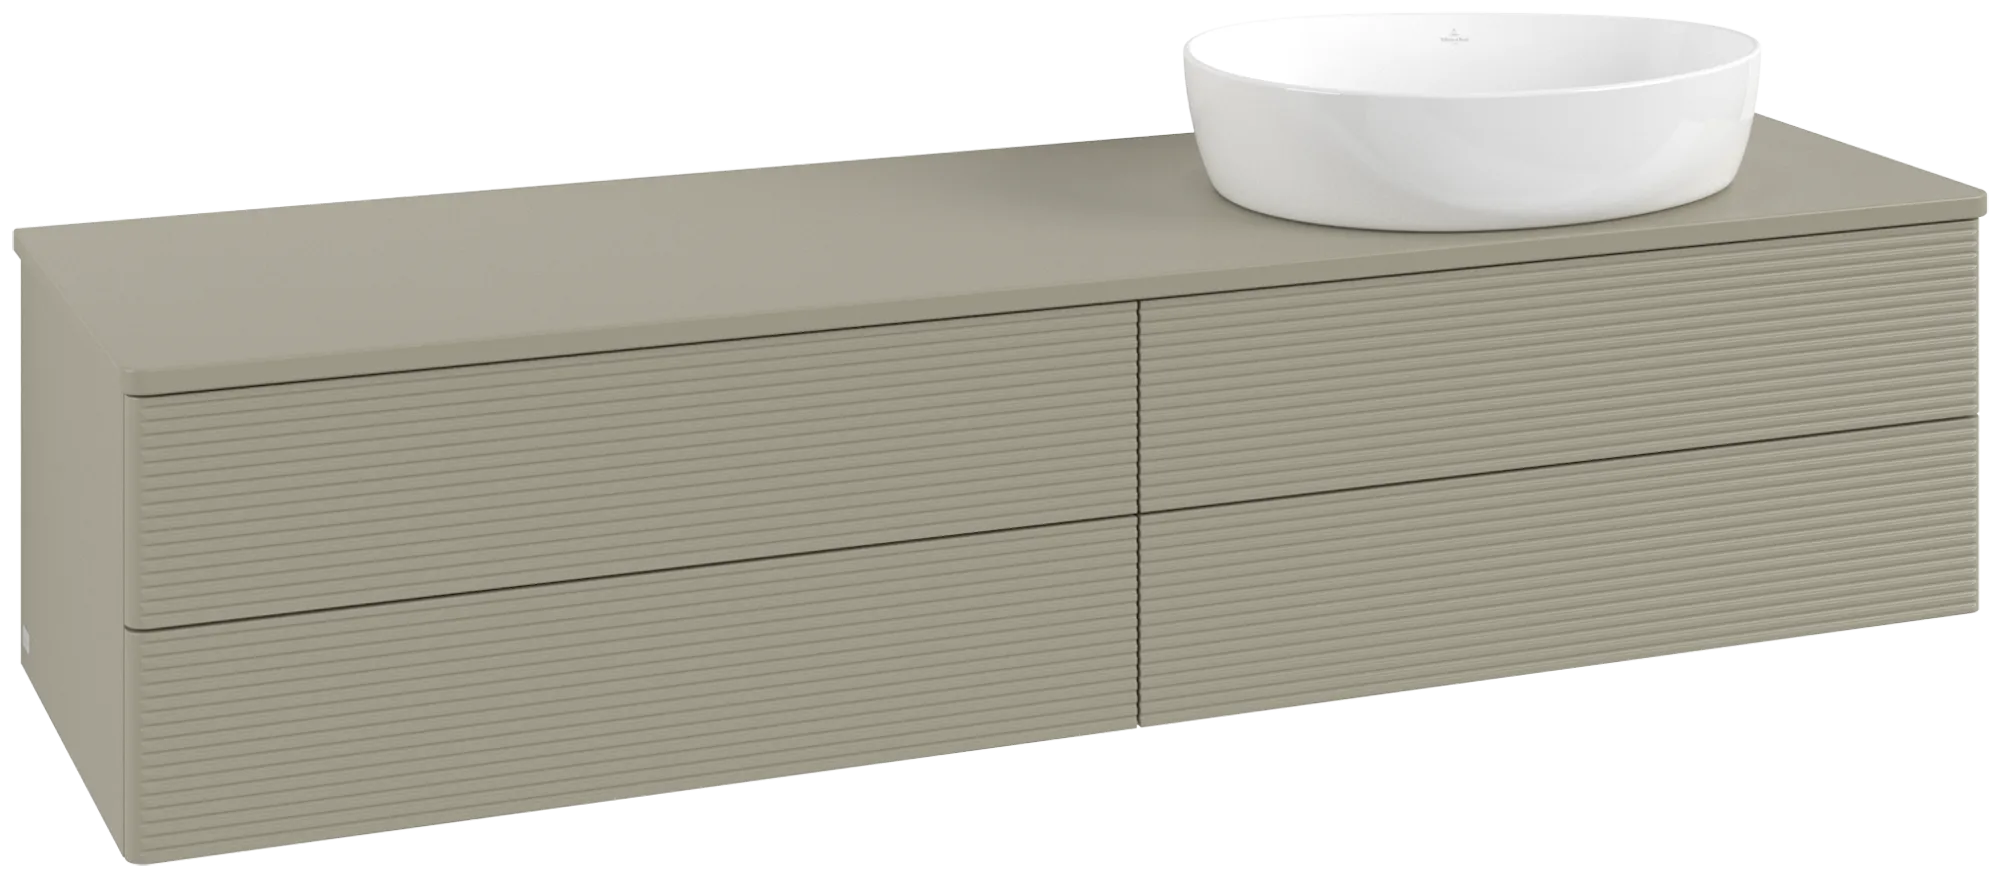 Picture of VILLEROY BOCH Antao Vanity unit, 4 pull-out compartments, 1600 x 360 x 500 mm, Front with grain texture, Stone Grey Matt Lacquer / Stone Grey Matt Lacquer #K27110HK